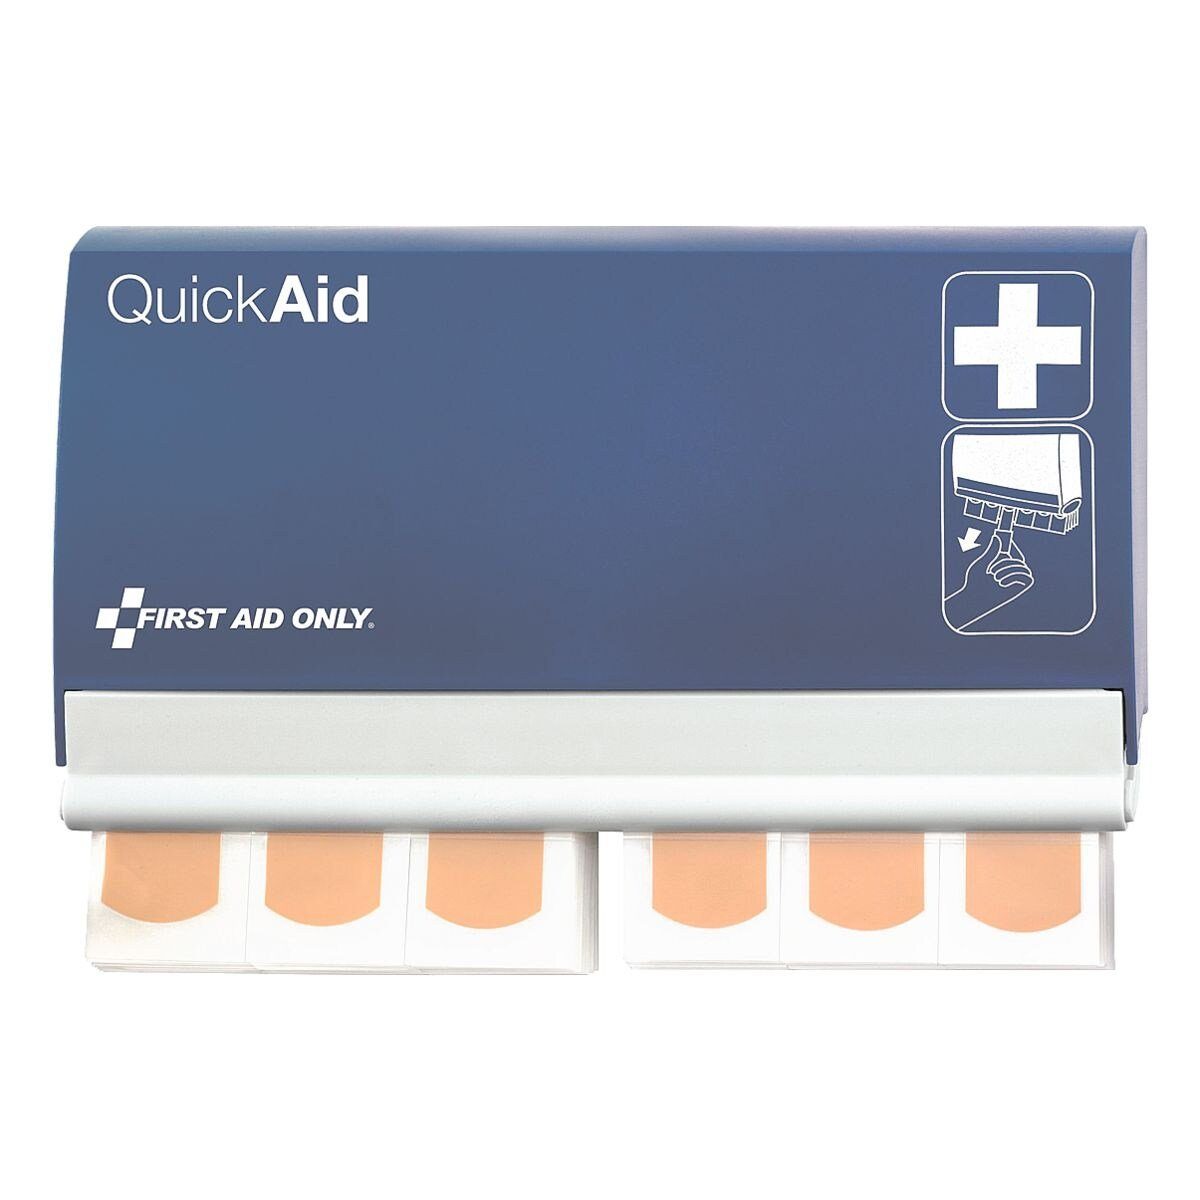 QuickAid FIRST Wundpflaster St), AID Pflasterspendersystem ONLY® (90